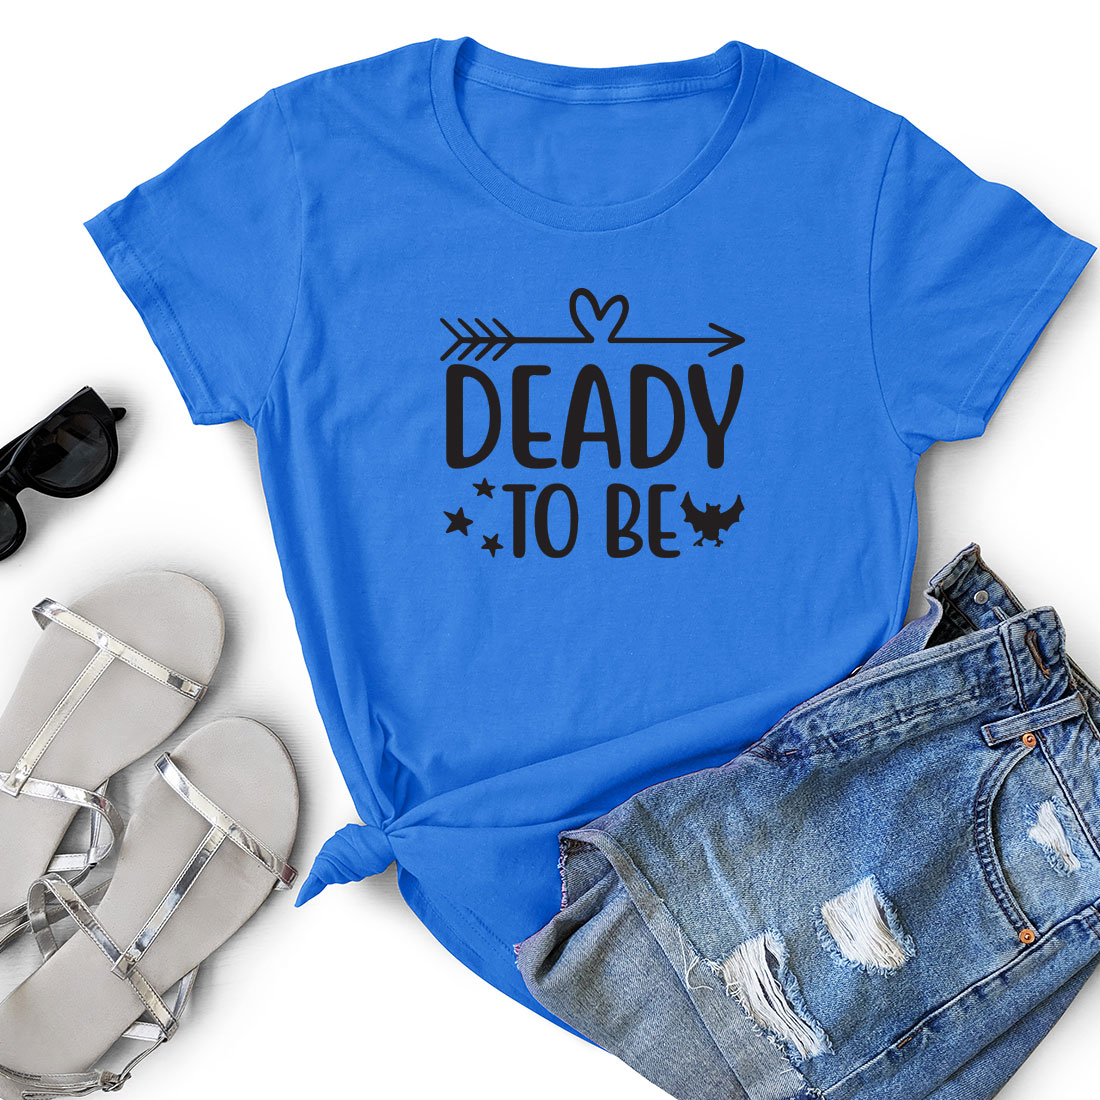 T - shirt that says deadly to be next to a pair of shorts.